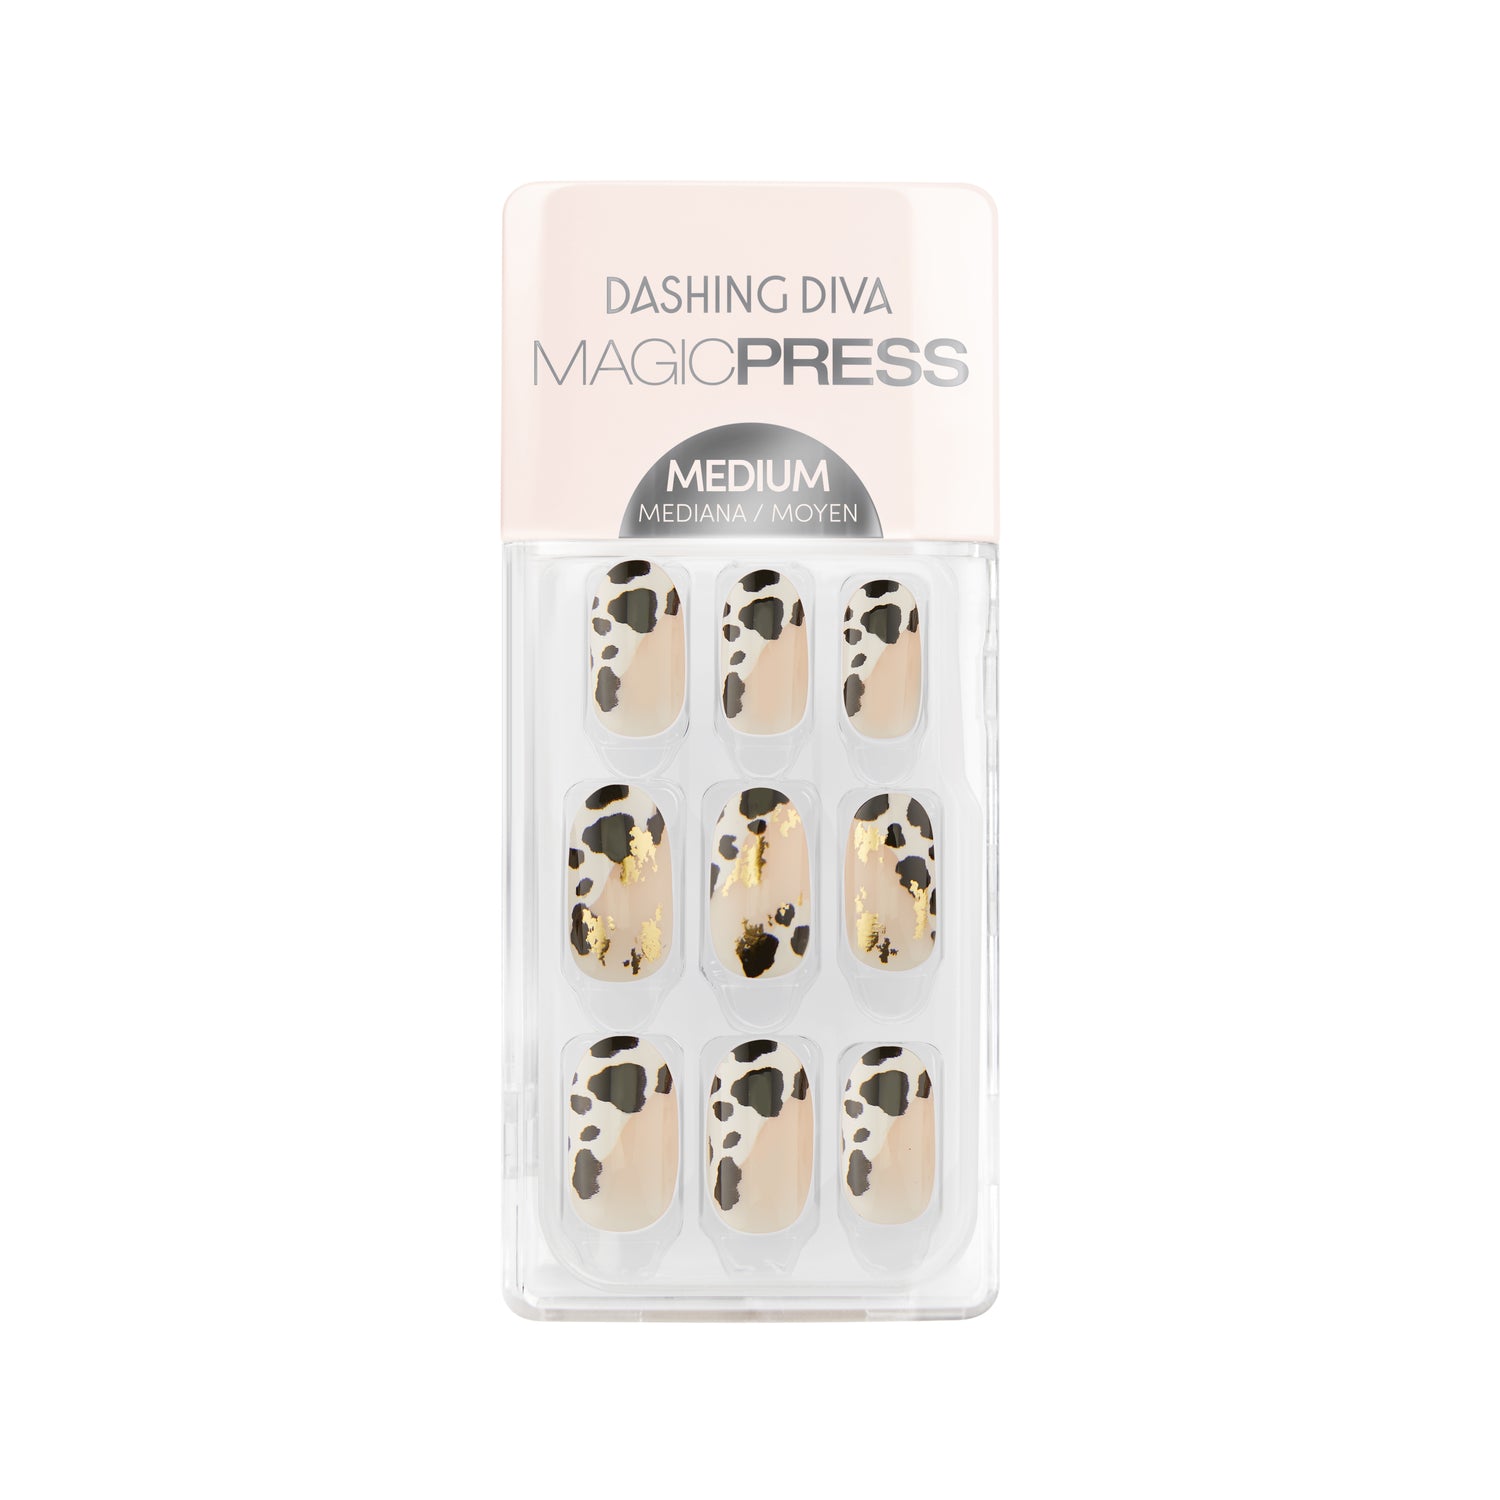 Dashing Diva MAGIC PRESS medium, oval cow print asymmetrical french nails with gold foil accents.